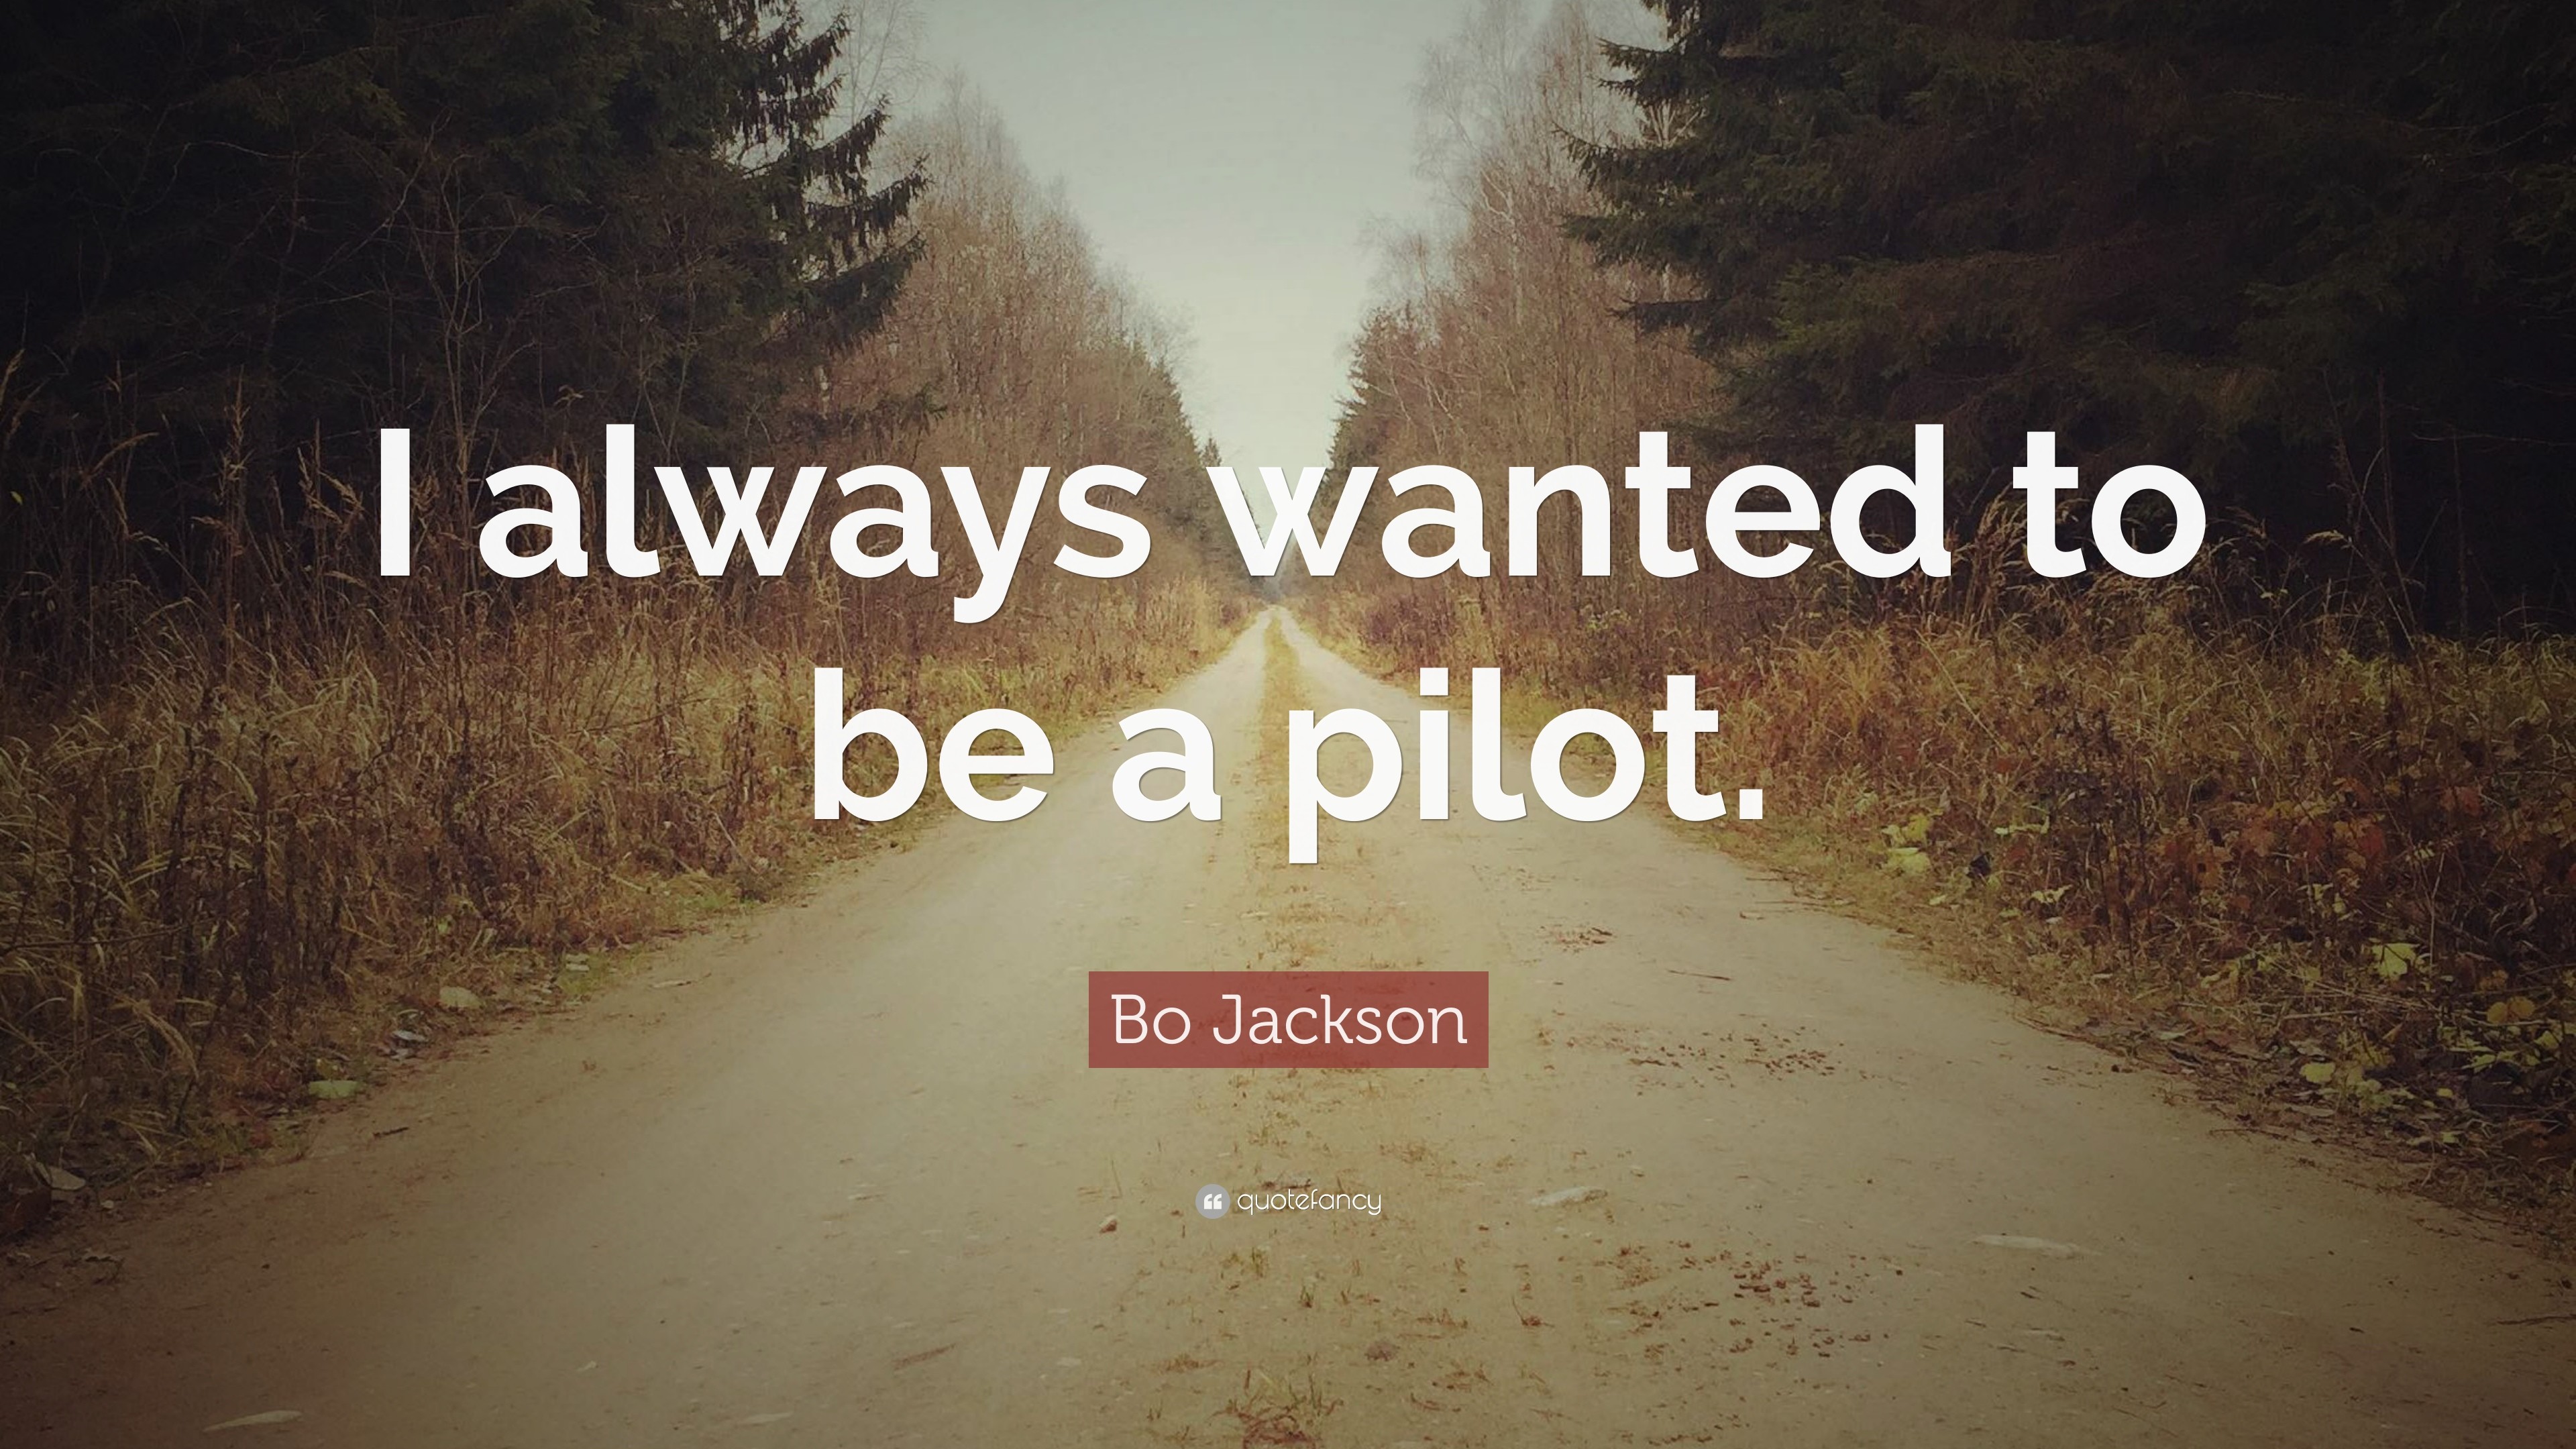 3840x2160 Bo Jackson Quote: “I always wanted to be a pilot.”